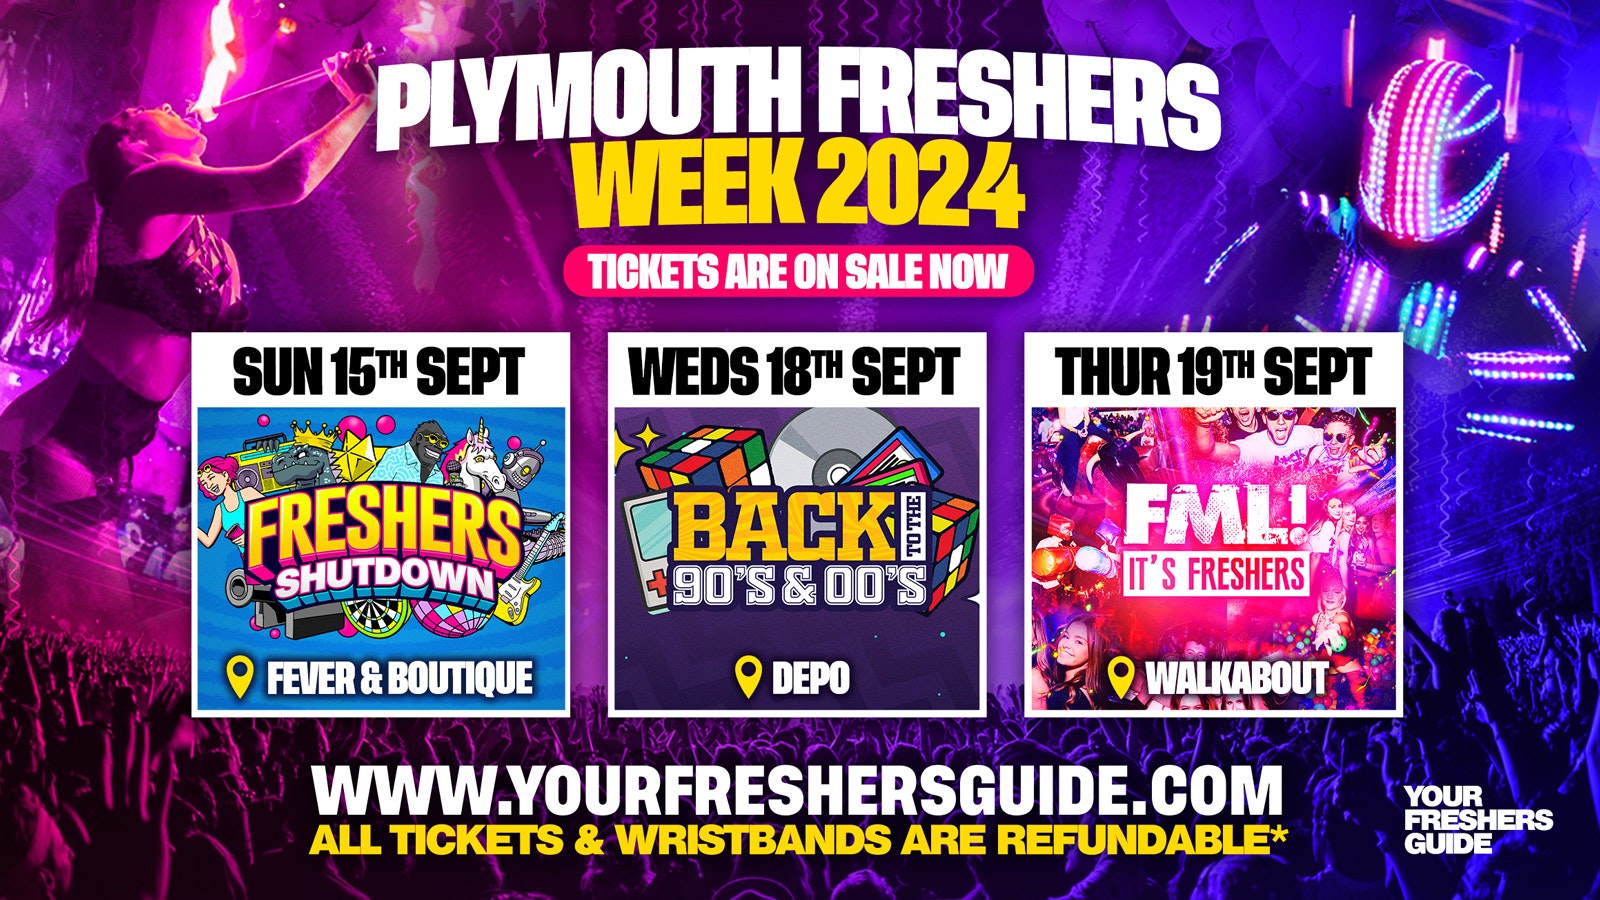 Plymouth Freshers Week Wristband 2024 – The Biggest Events of Plymouth Freshers 2024 🎉